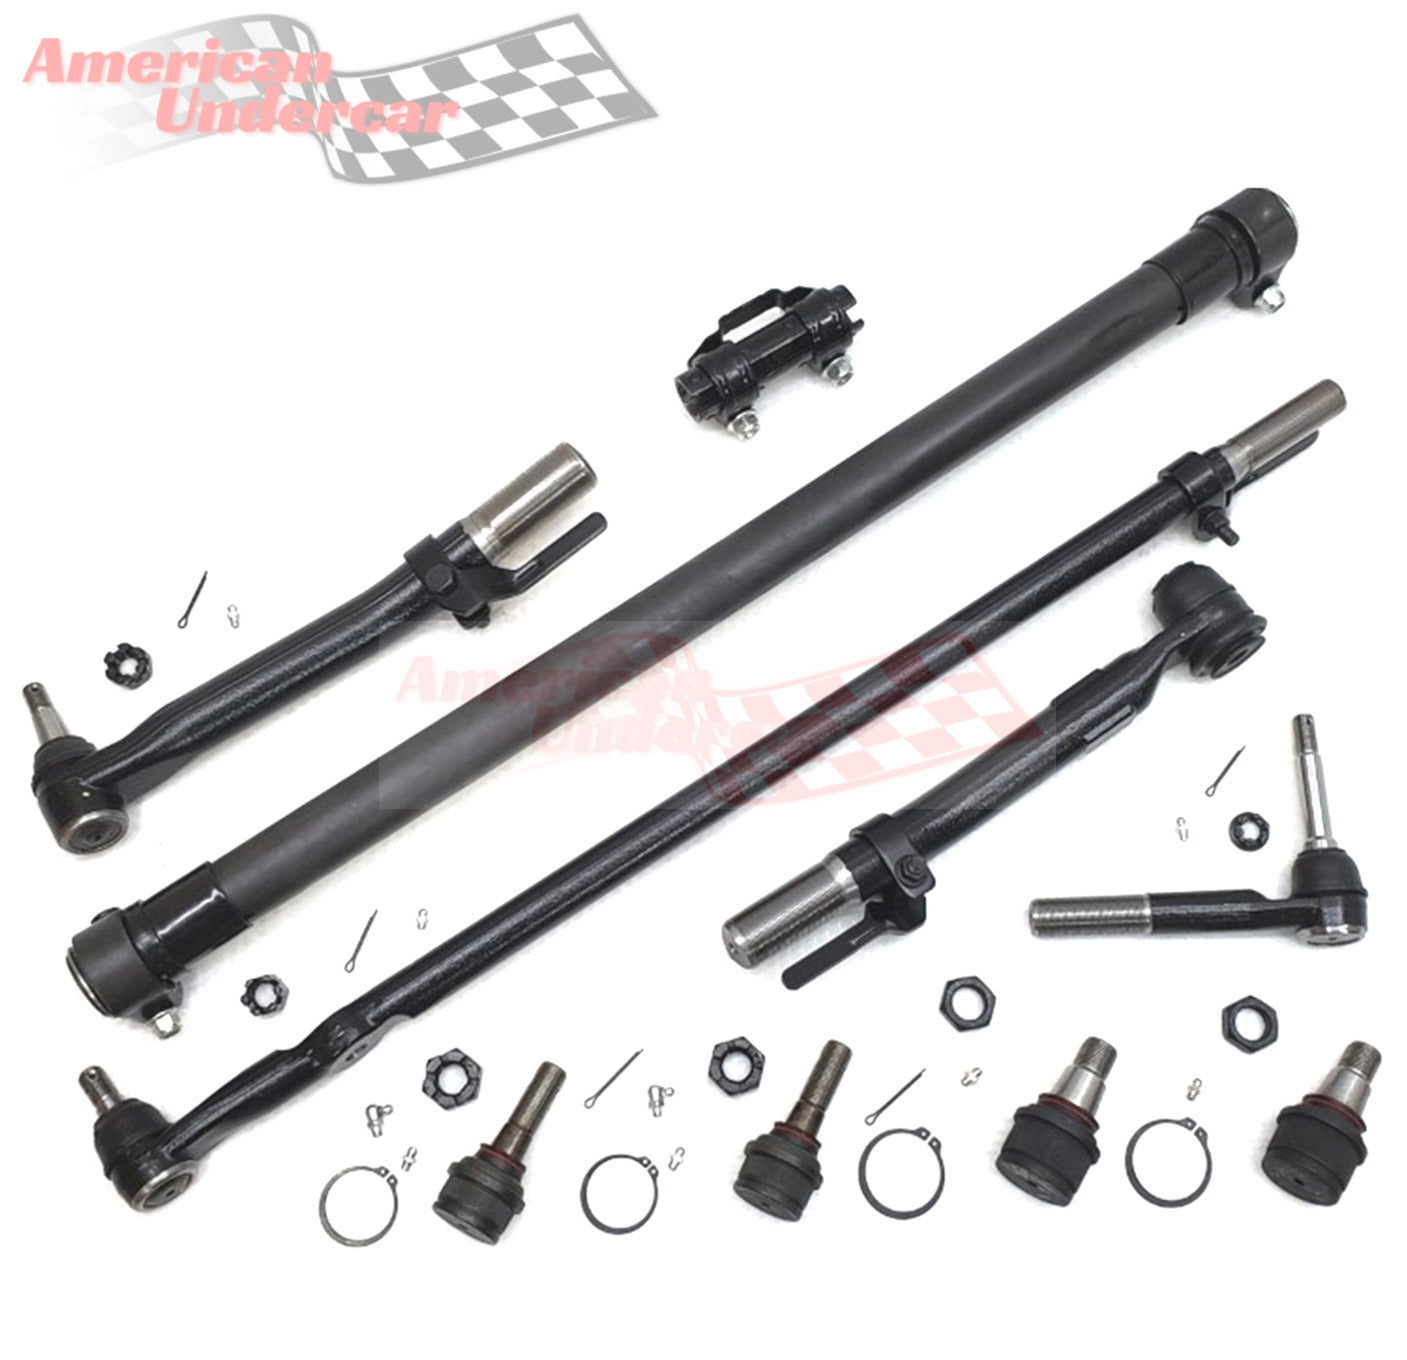 XRF Ball Joint Steering and Suspension Kit for 2011-2016 Ford F250, F350 Super Duty 4x4 Narrow Frame